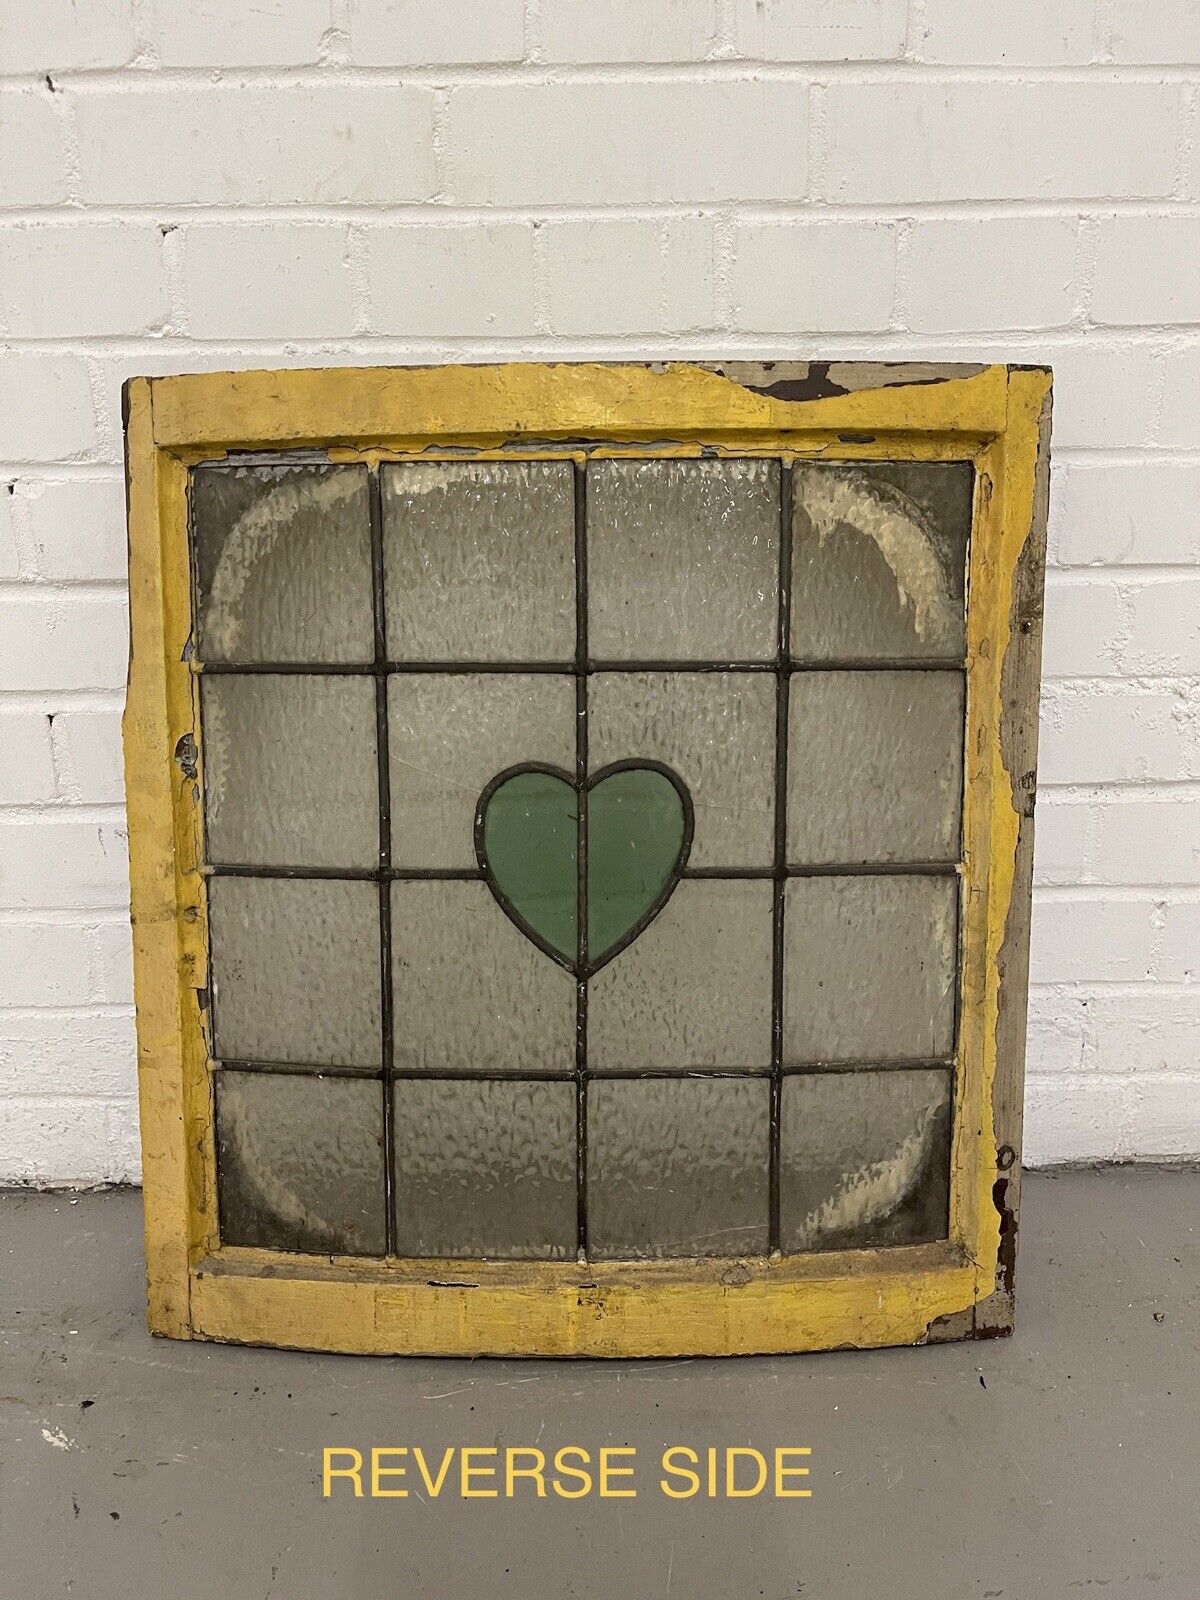 Job Lot Of Three Reclaimed Old Curved Georgian Heart Shaped Panel Wooden Windows